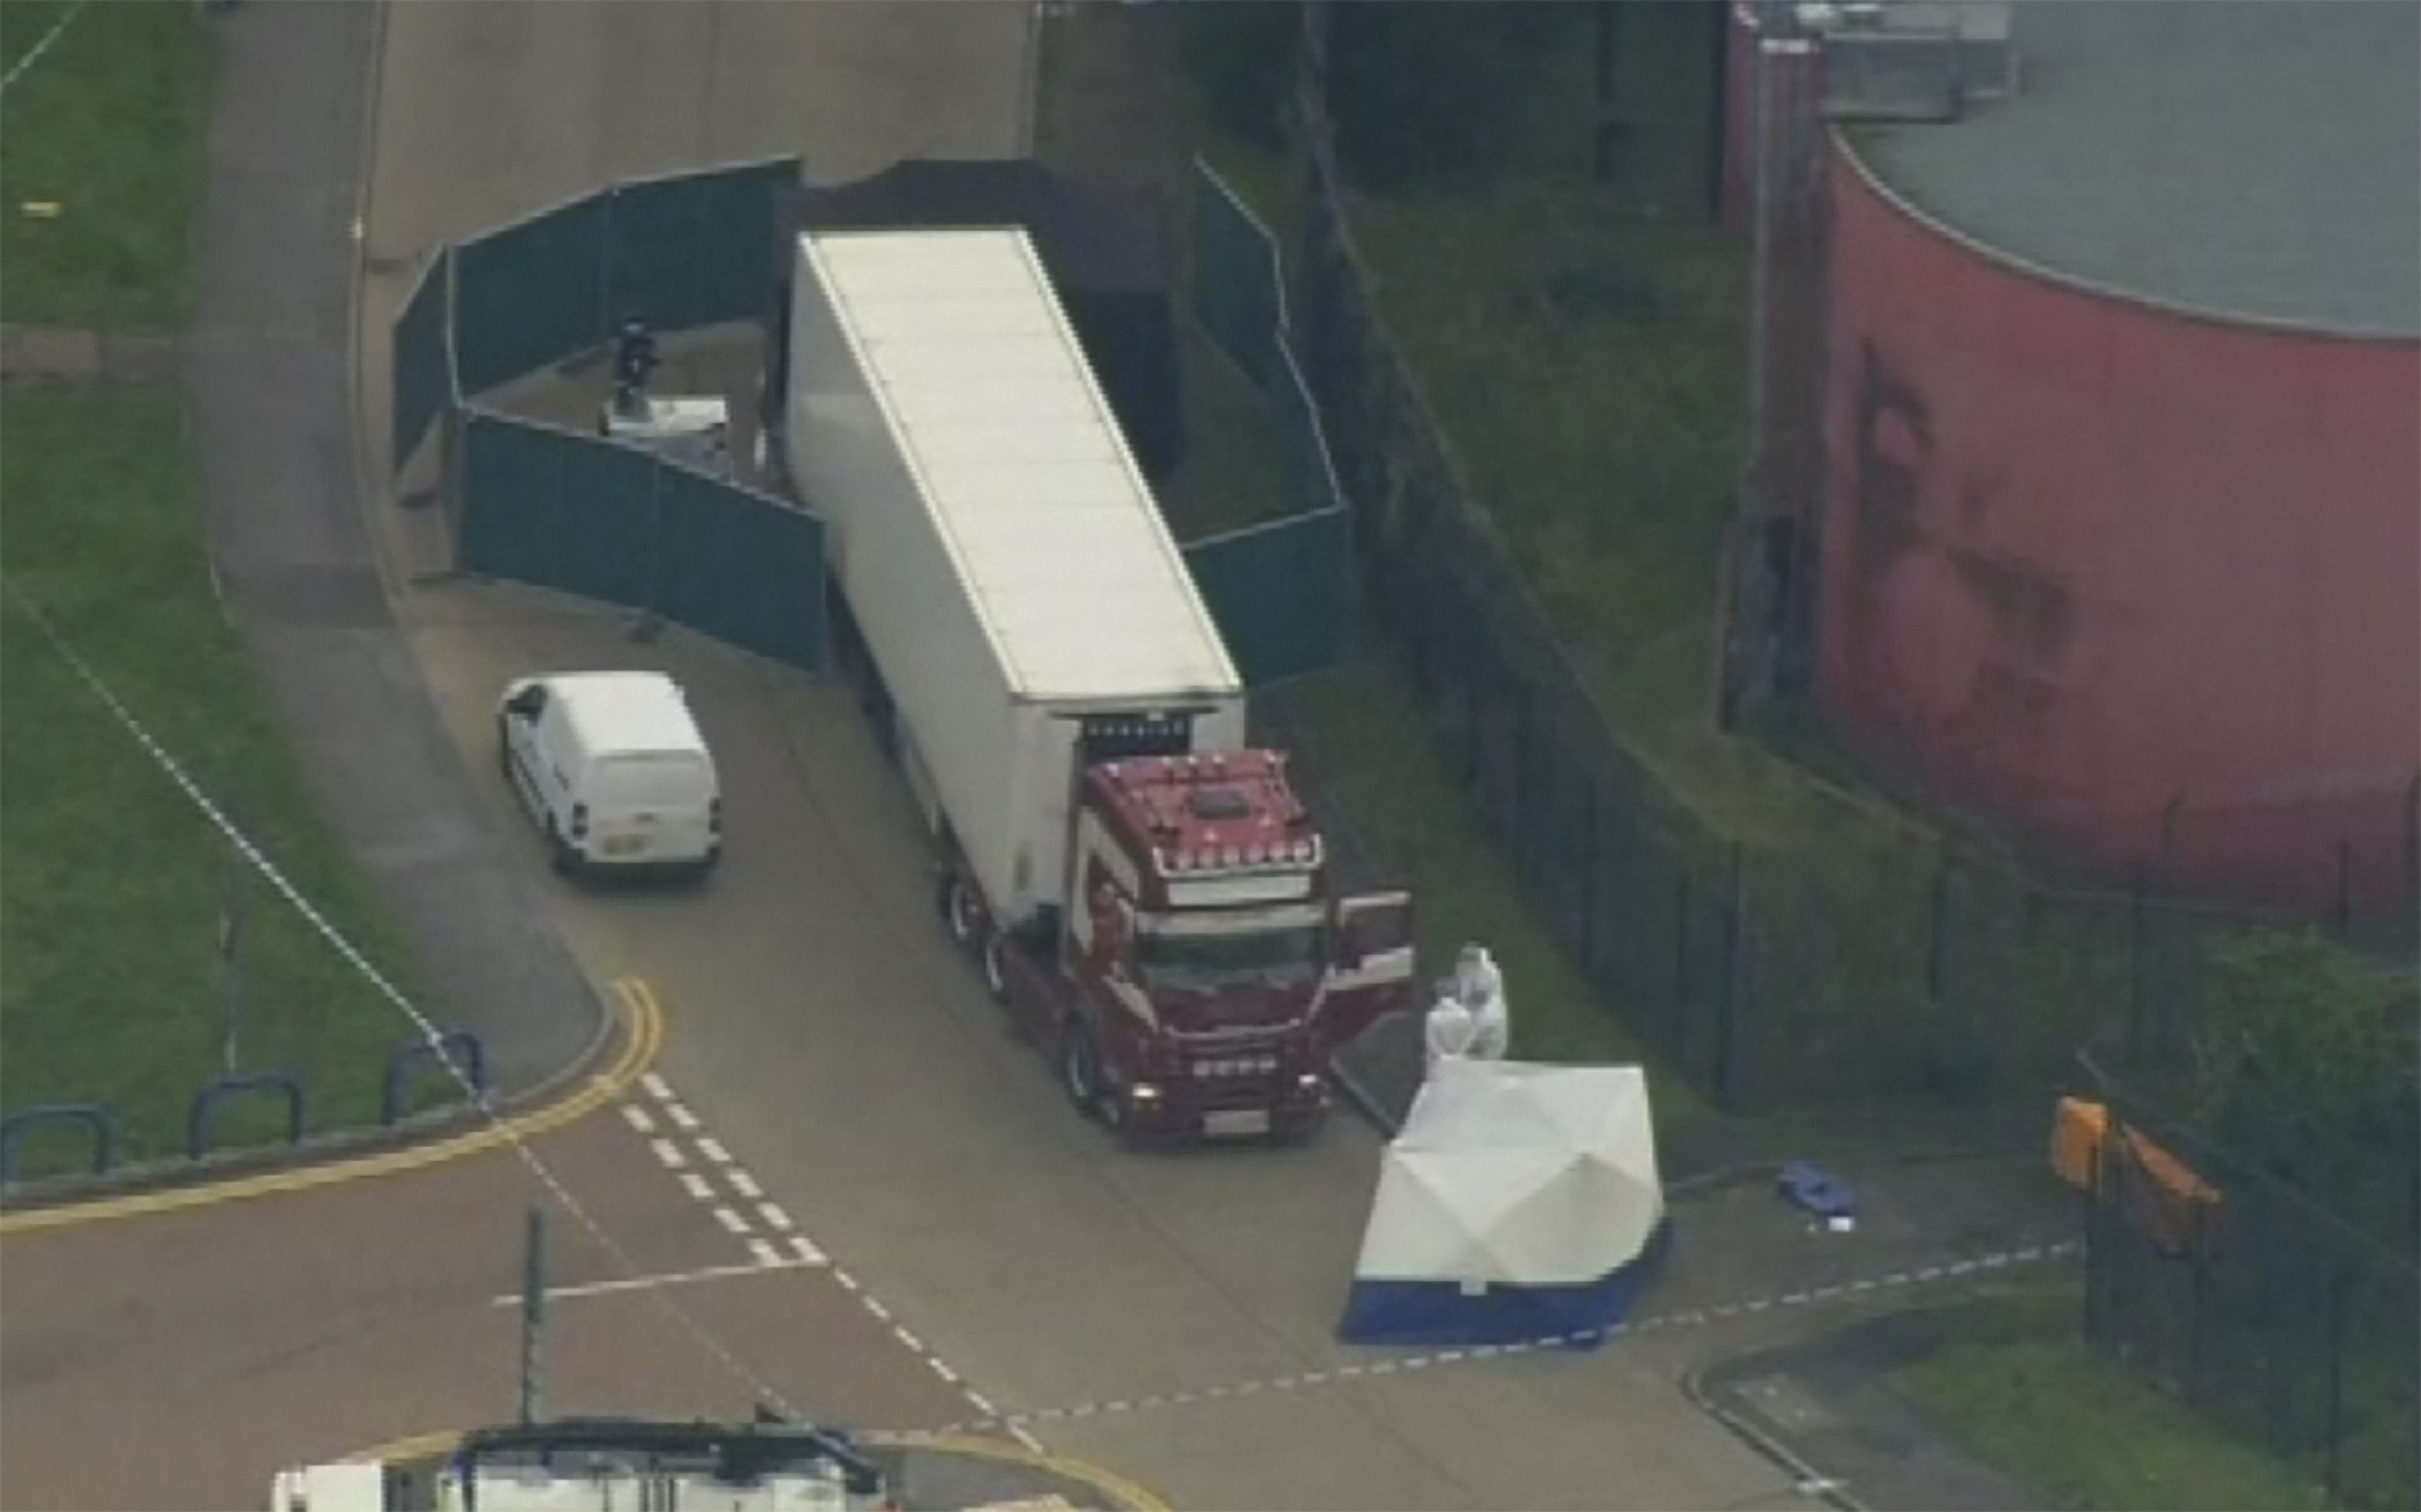 39 dead bodies found in truck container near London, driver arrested